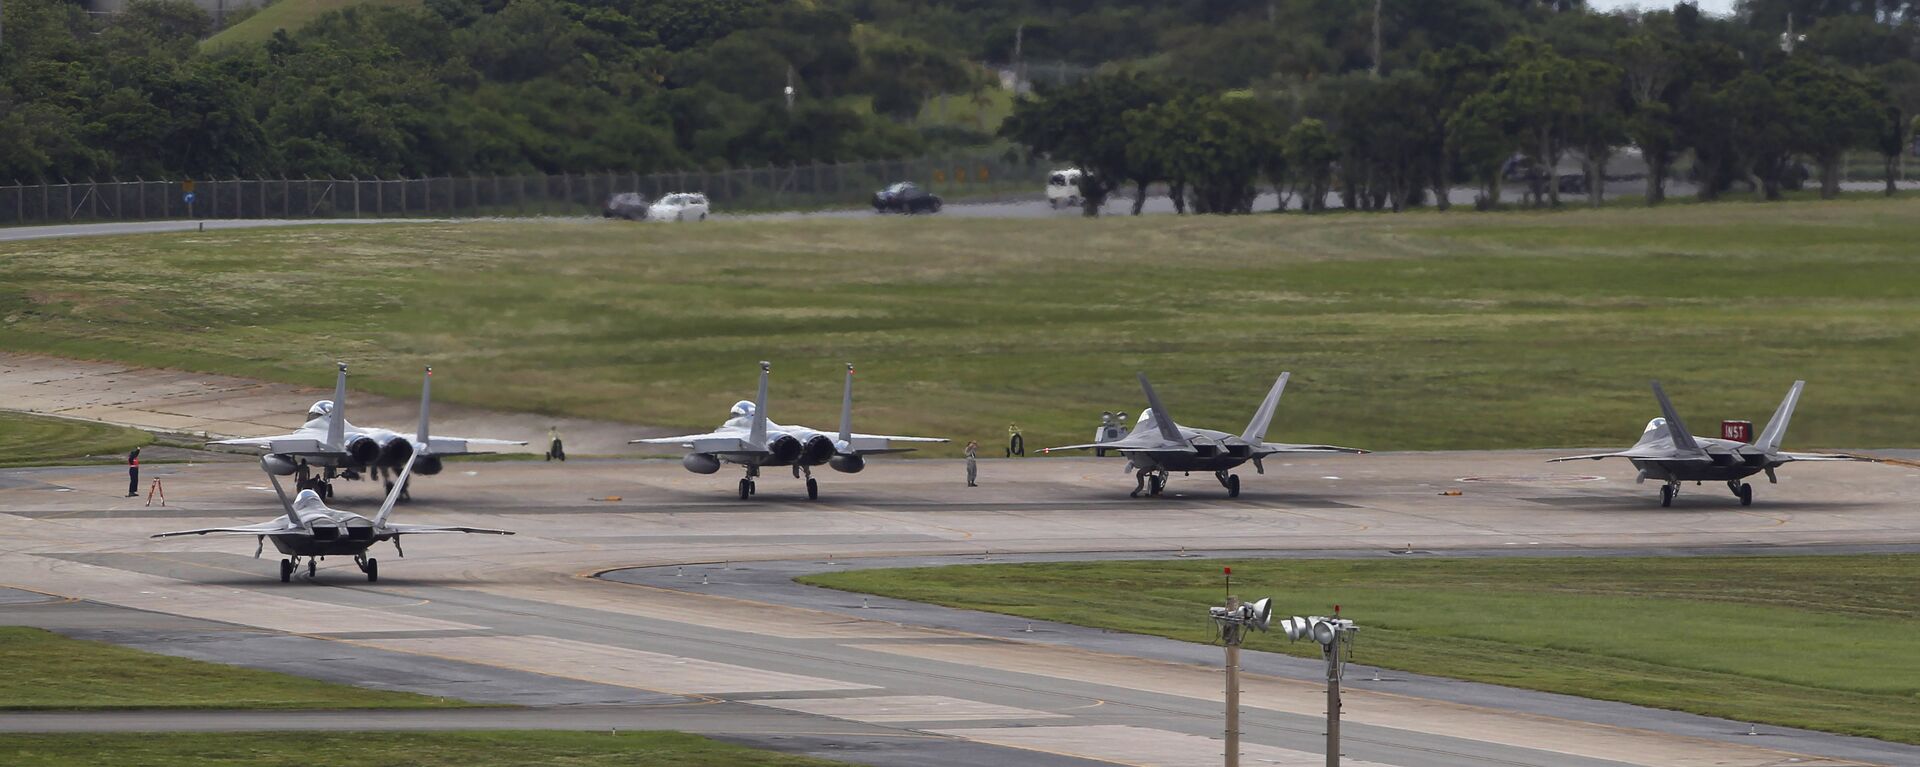  U.S. Air Force F-22 Raptors, right, and two F-15 Eagles prepare for take-off at Kadena Air Base on the southern island of Okinawa, in Japan (File) - Sputnik International, 1920, 22.10.2019